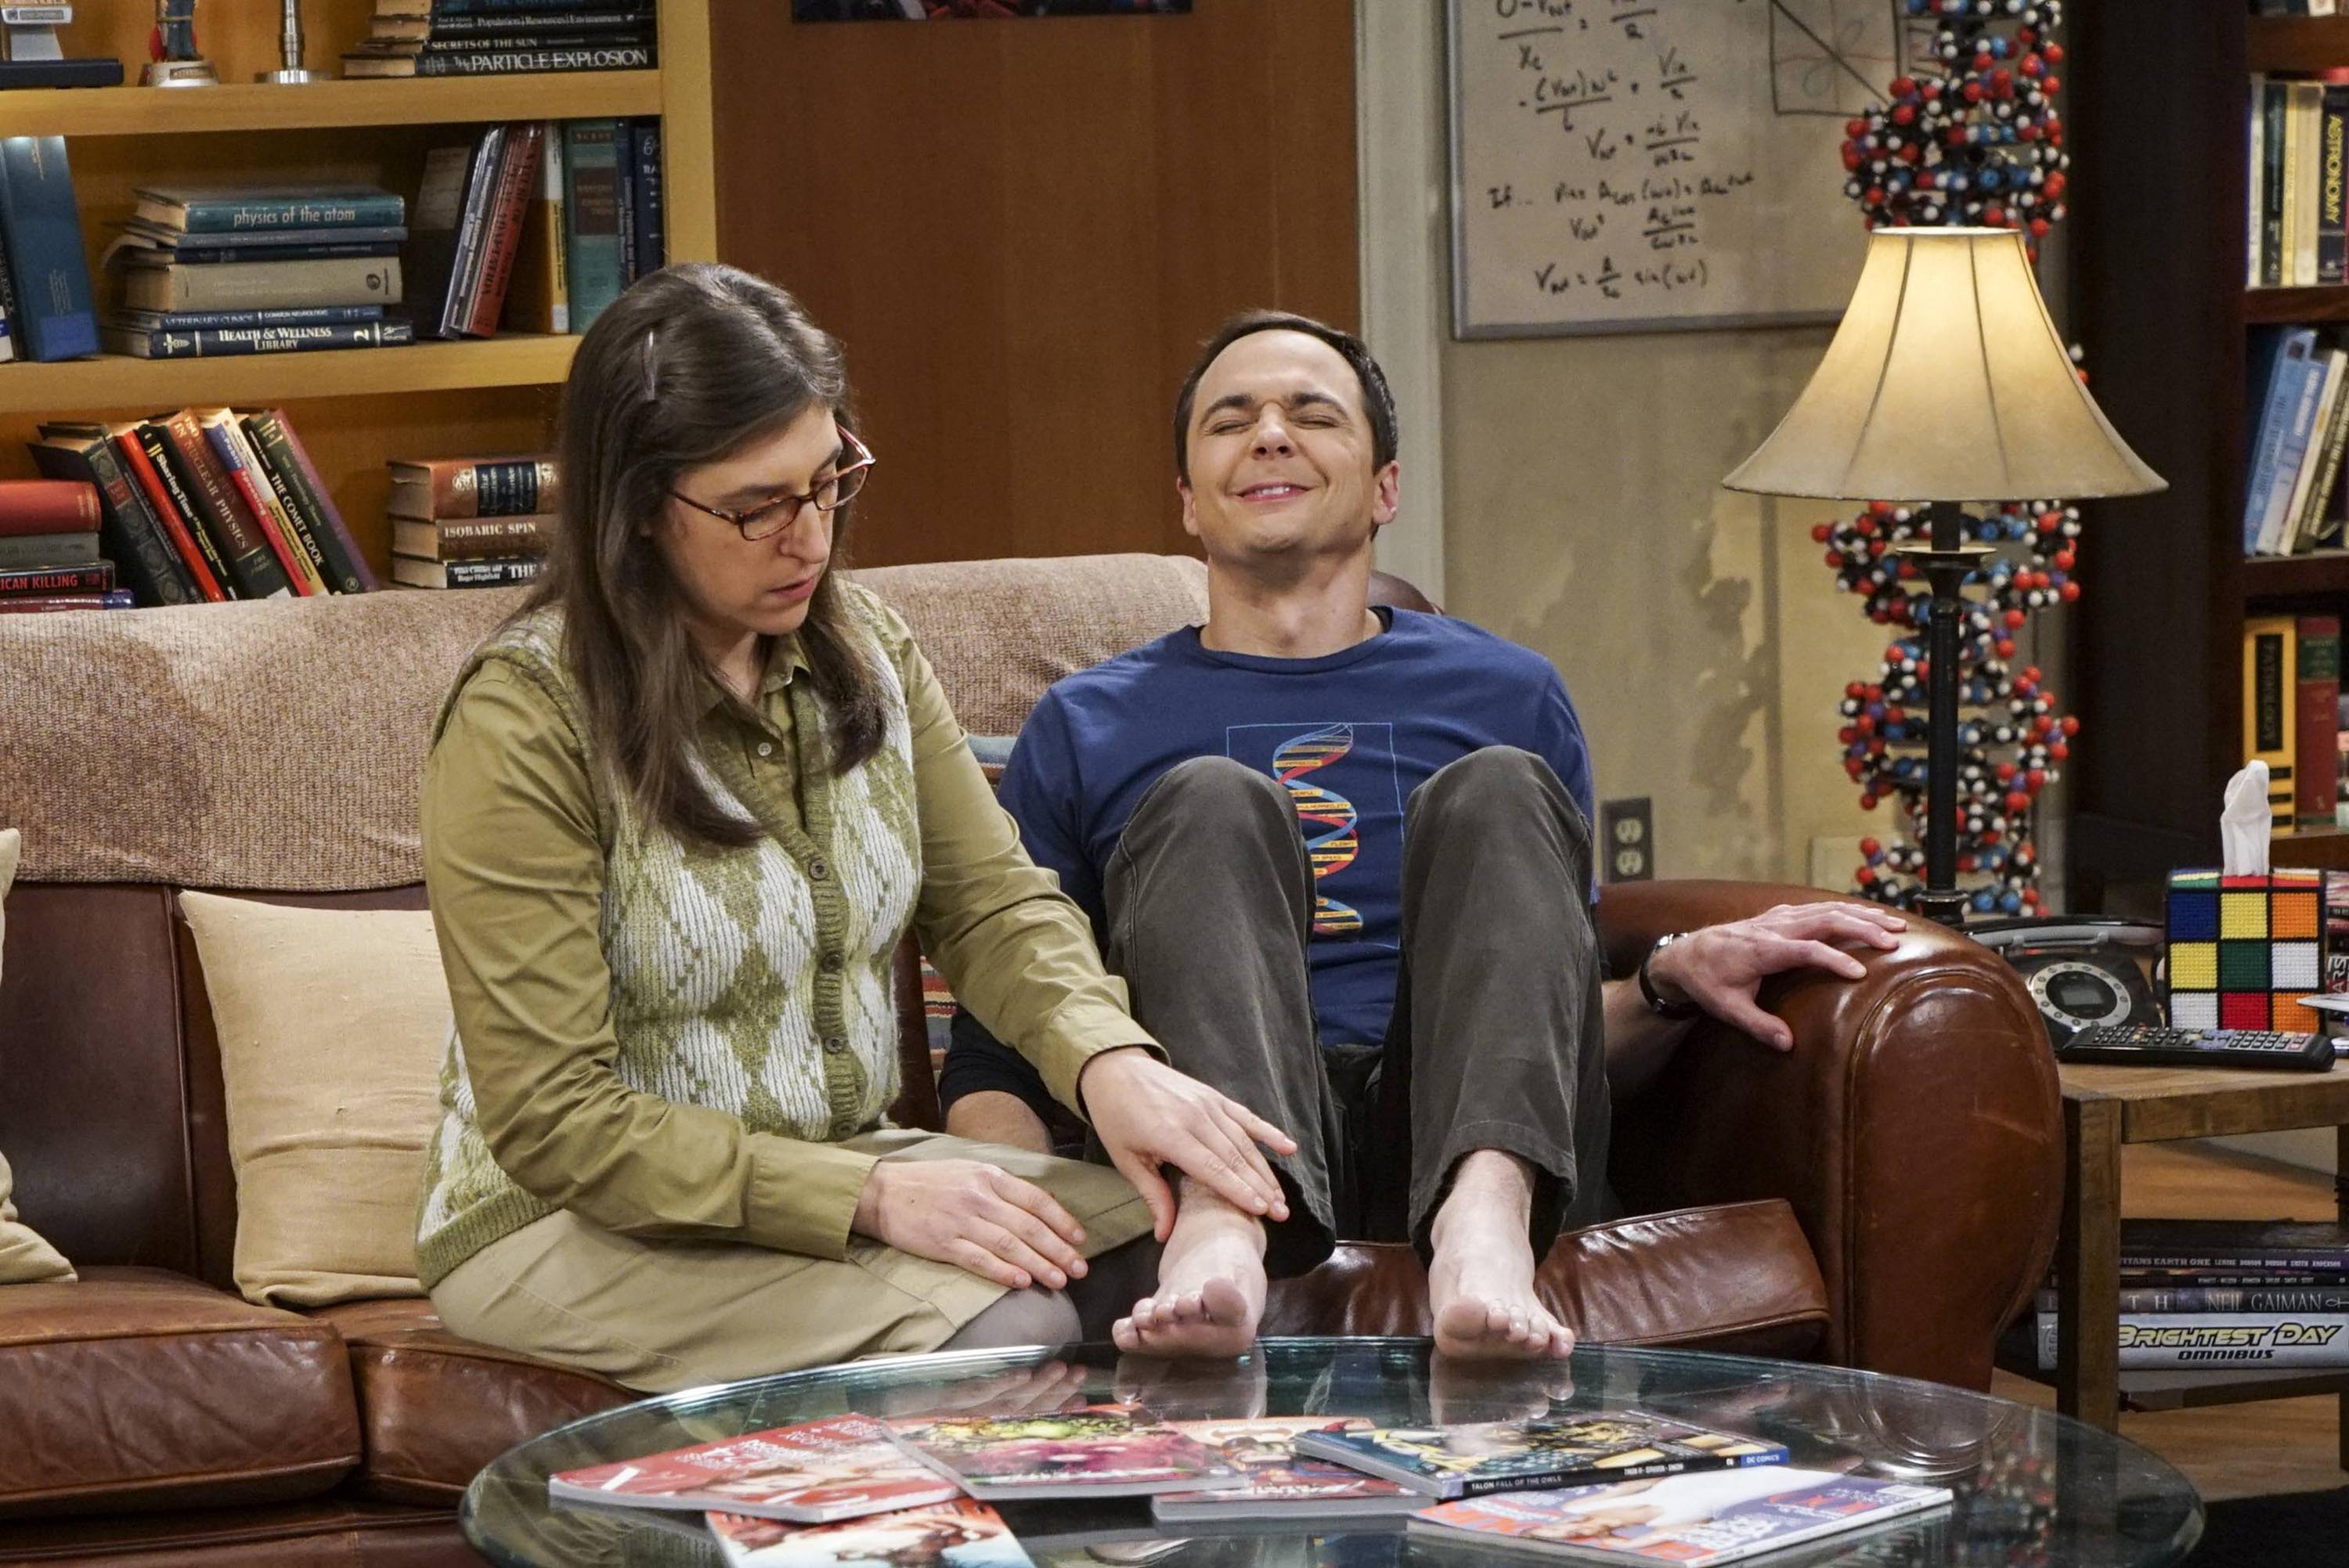 Amy and Sheldon from The Big Bang Theory sitting on a couch, Sheldon in a relaxed pose with a smile